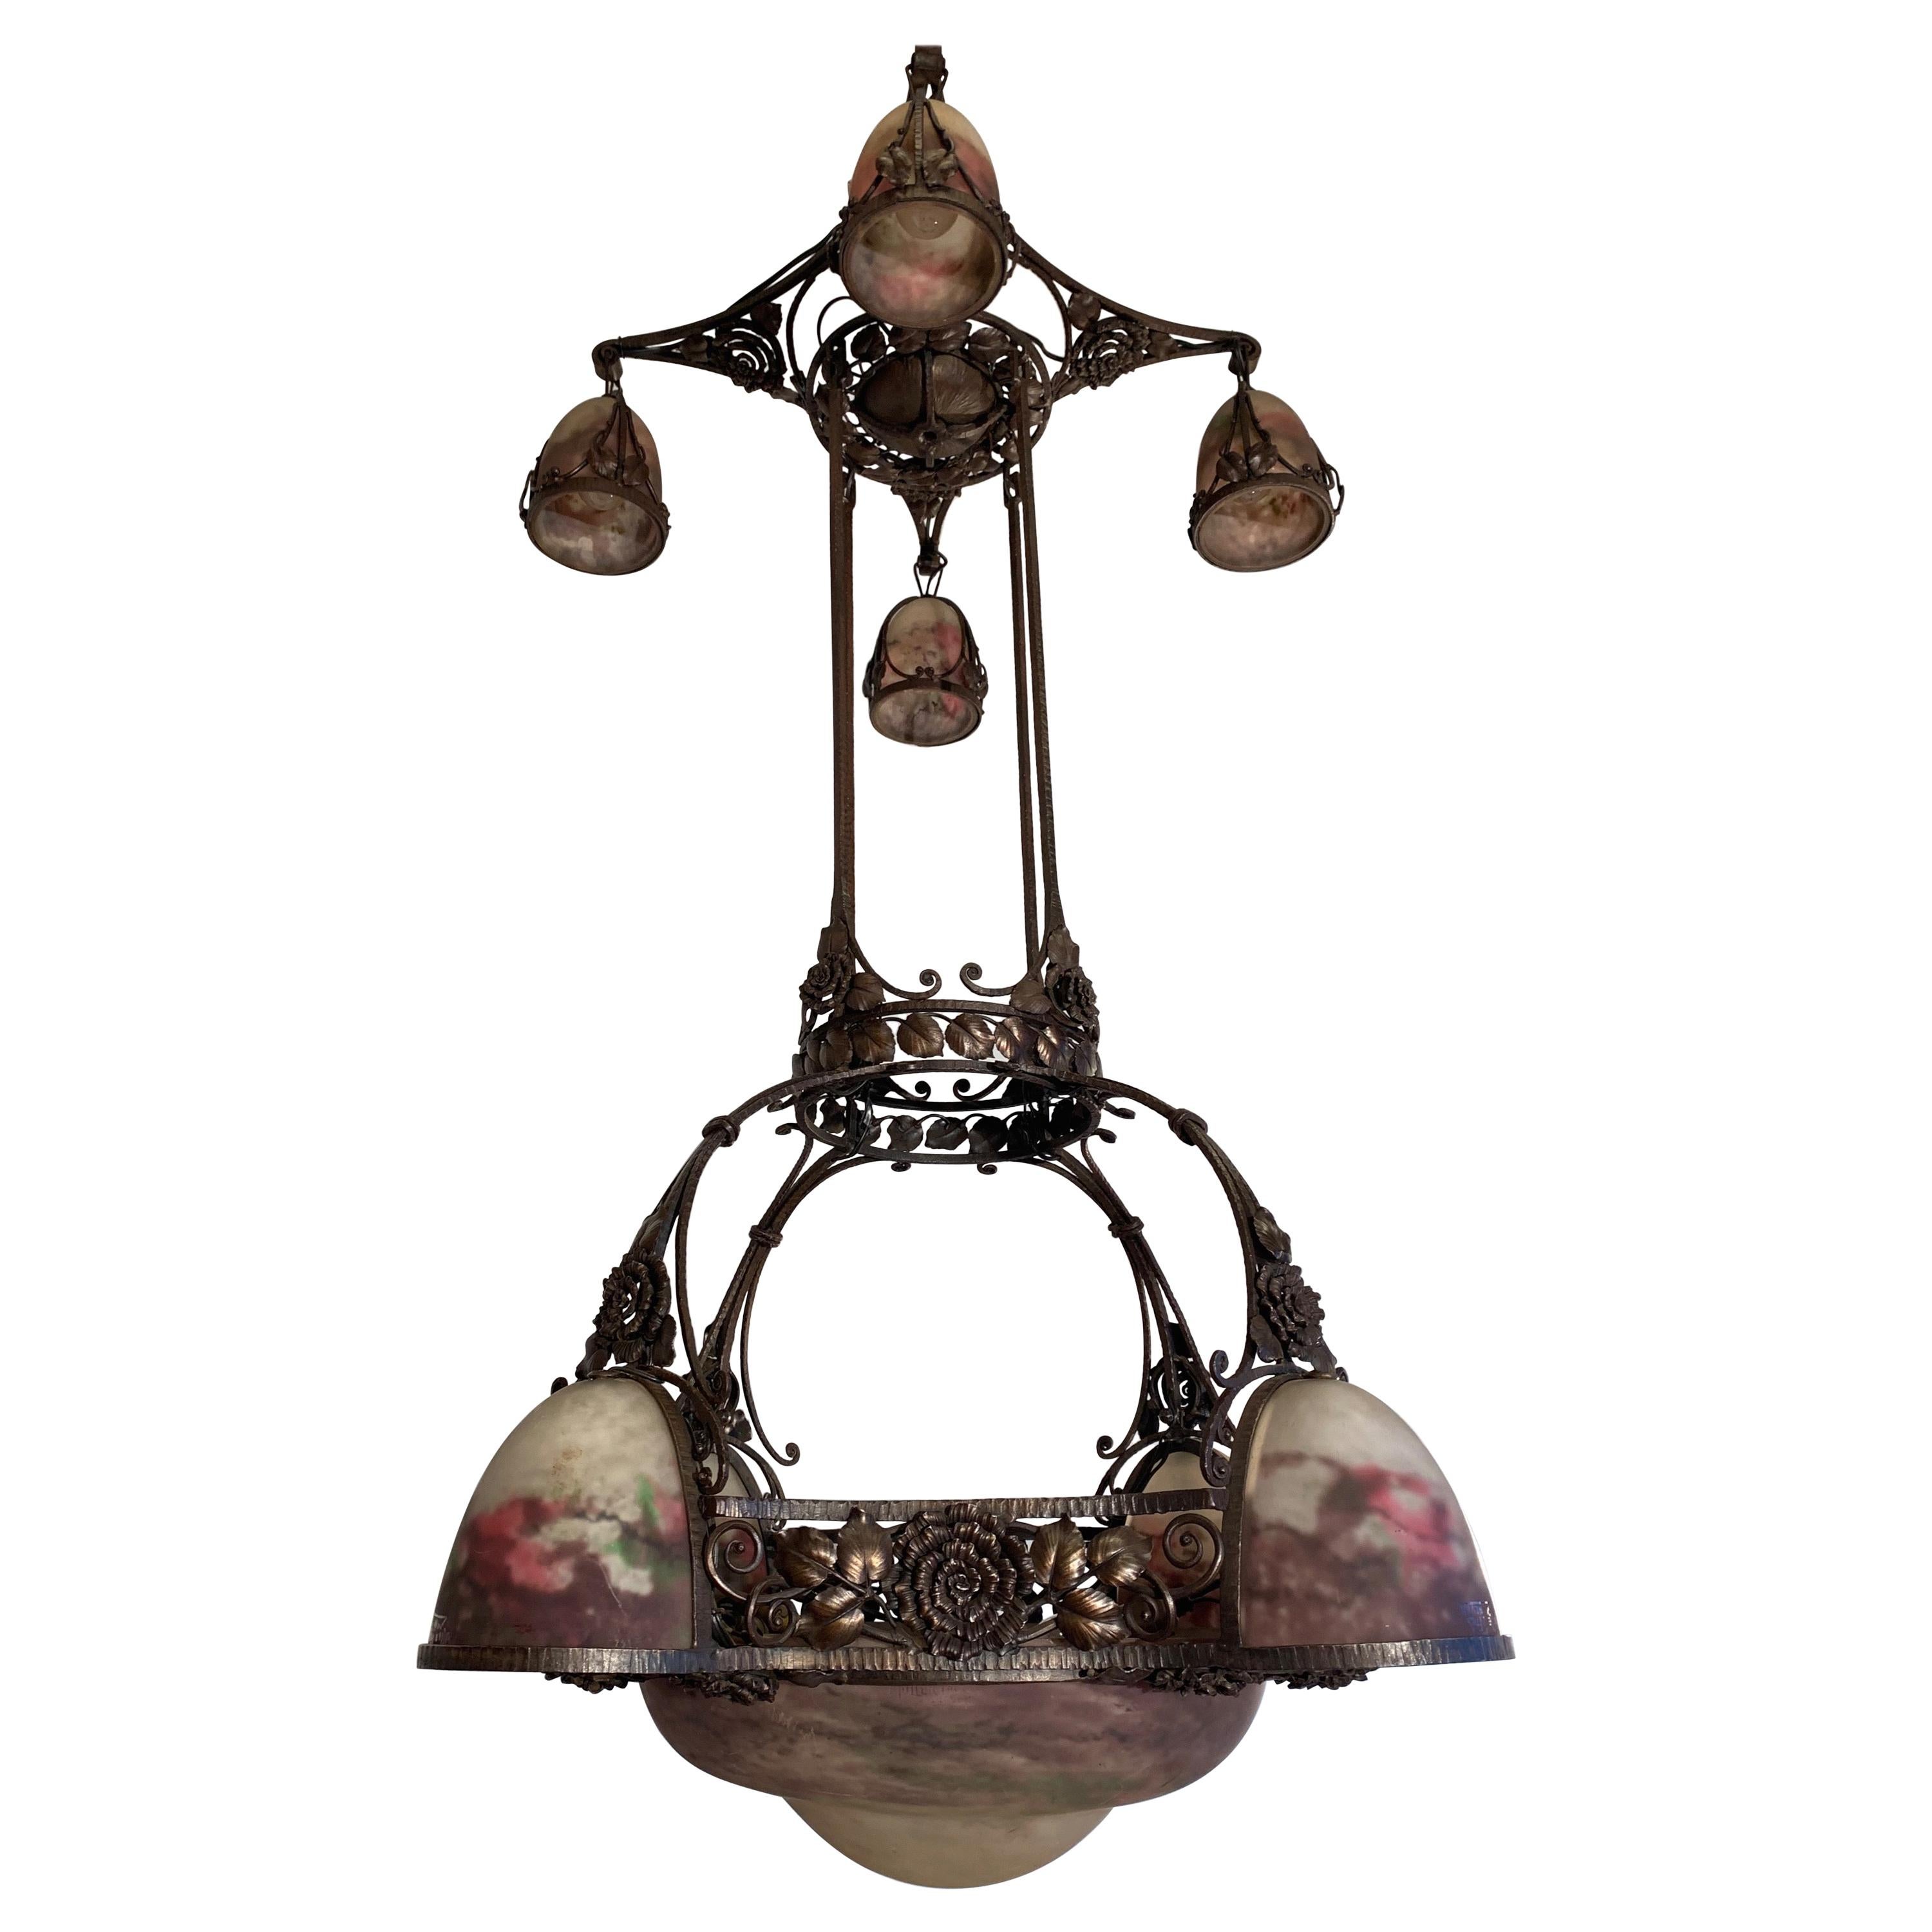 Spectacular and largest hand forged Art Deco pendant light with striking art glass shades.

This monumental and all handcrafted Art Deco two-tier light fixture from the heydays of the French Art Deco era is among the best pieces we ever had the